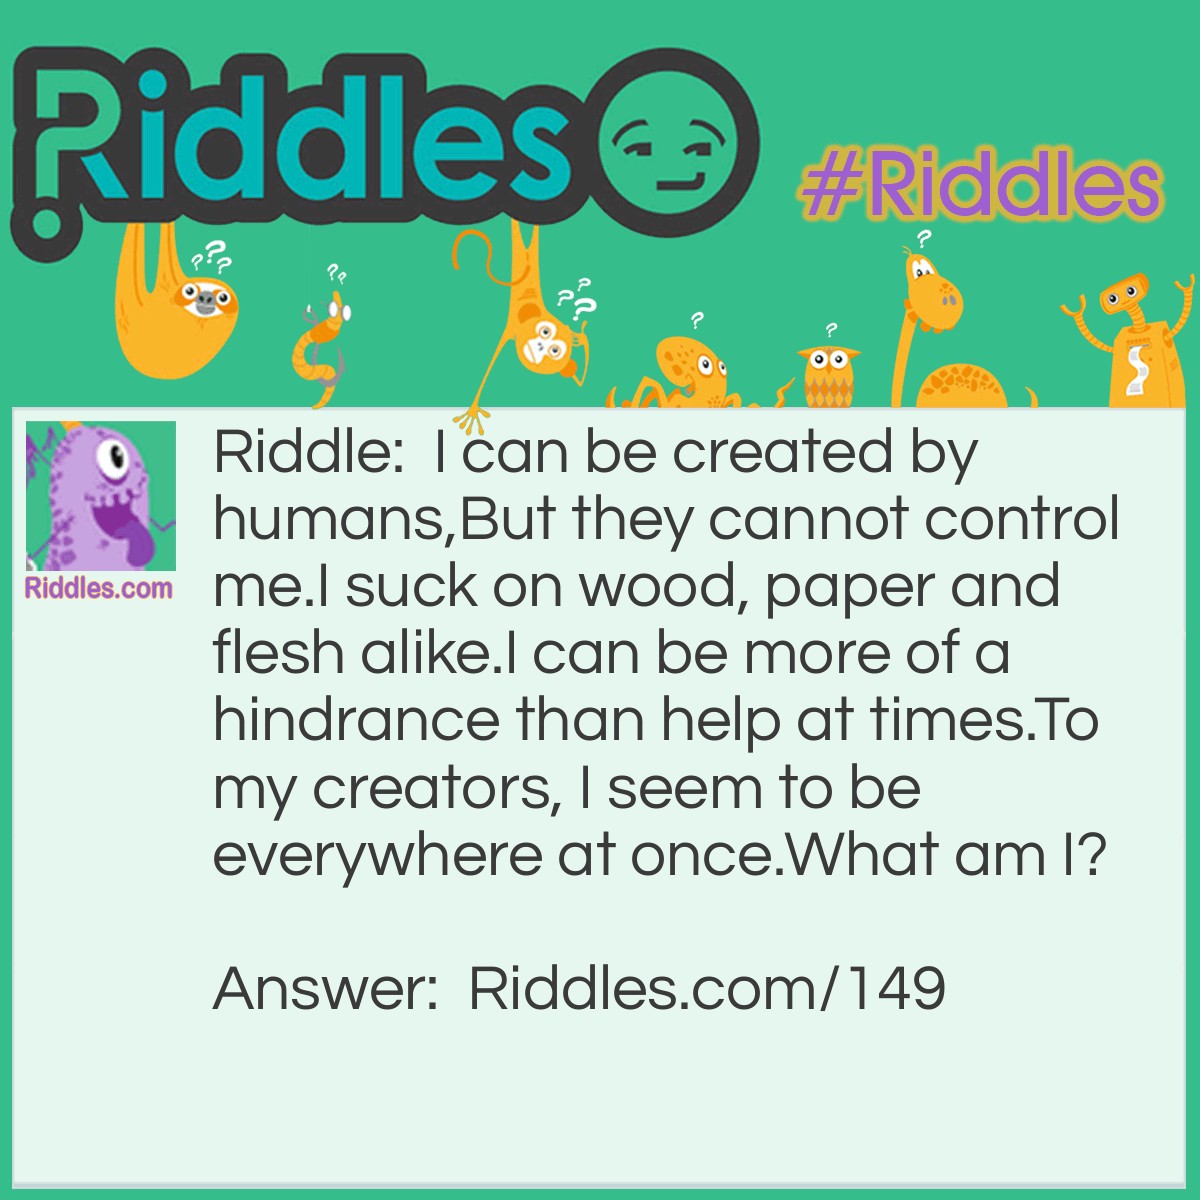 Riddle: I can be created by humans,
But they cannot control me.
I suck on wood, paper and flesh alike.
I can be more of a hindrance than help at times.
To my creators, I seem to be everywhere at once.
What am I?  Answer: A baby. 